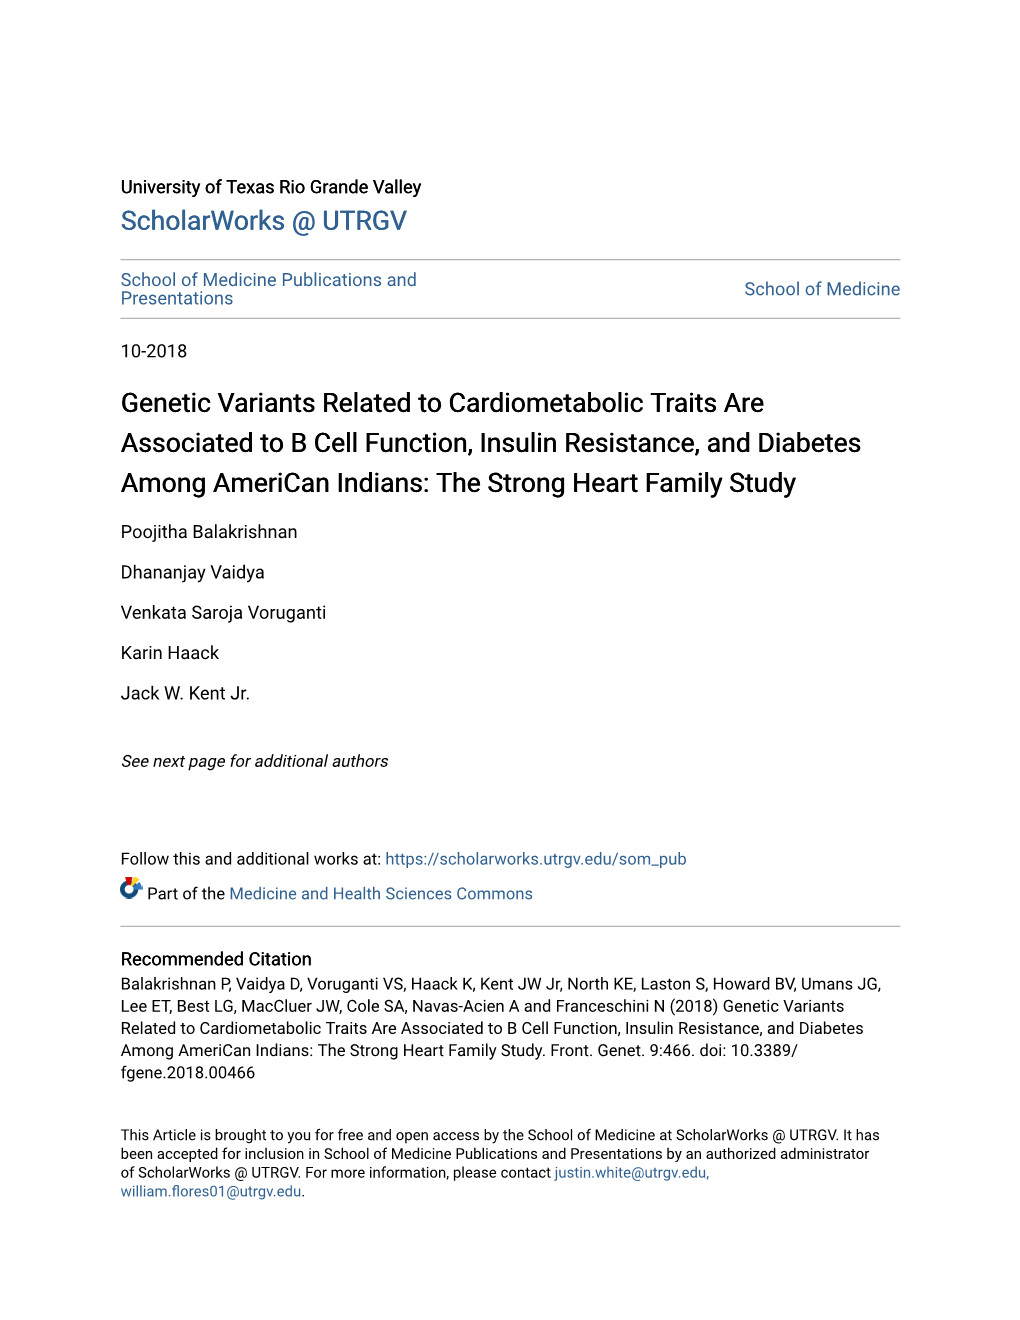 Genetic Variants Related to Cardiometabolic Traits Are